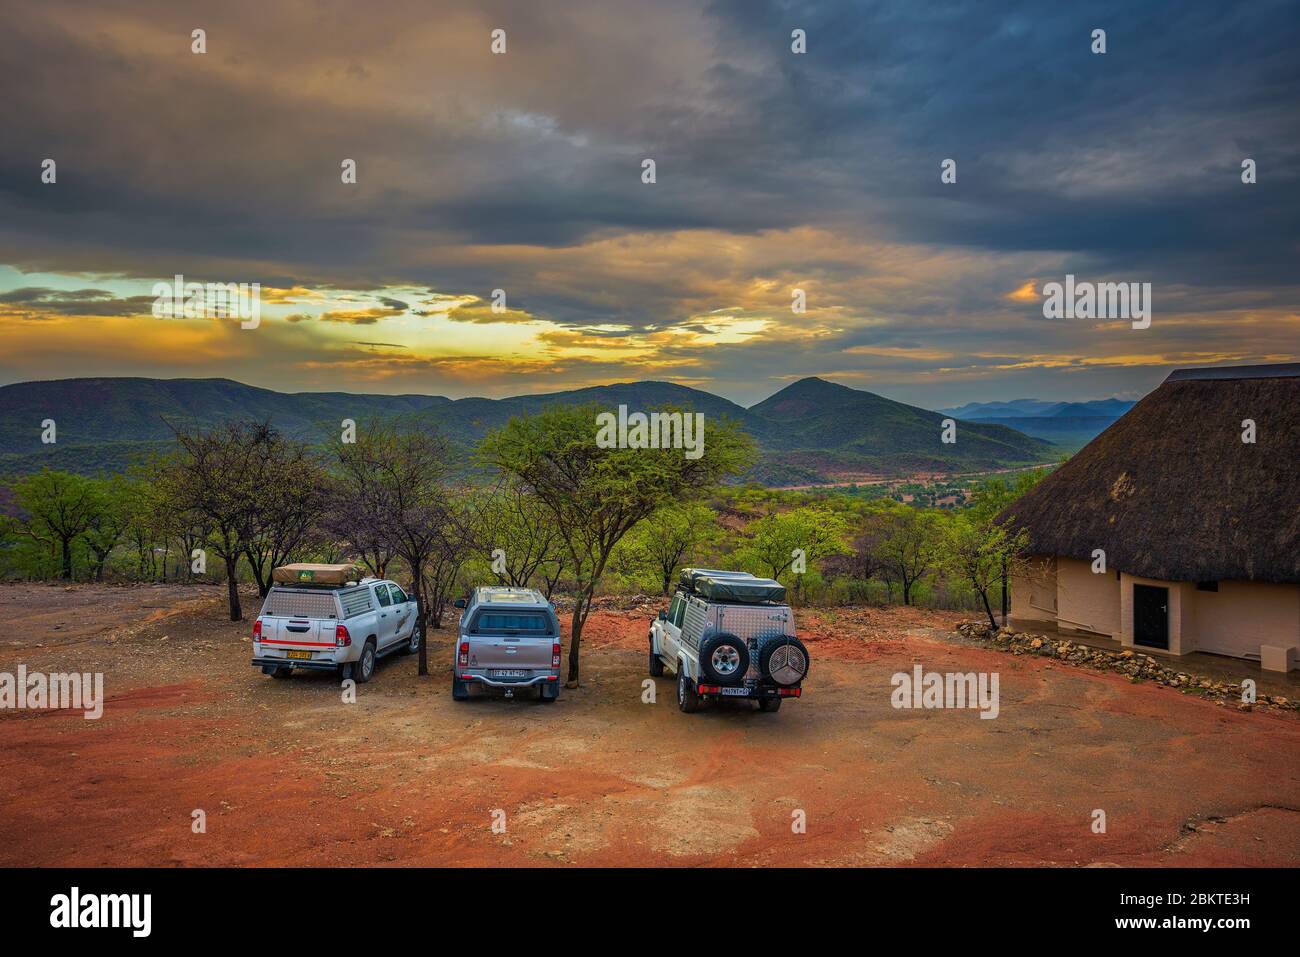 Suv cars parked at a tourist campsite in Namibia at sunset Stock Photo